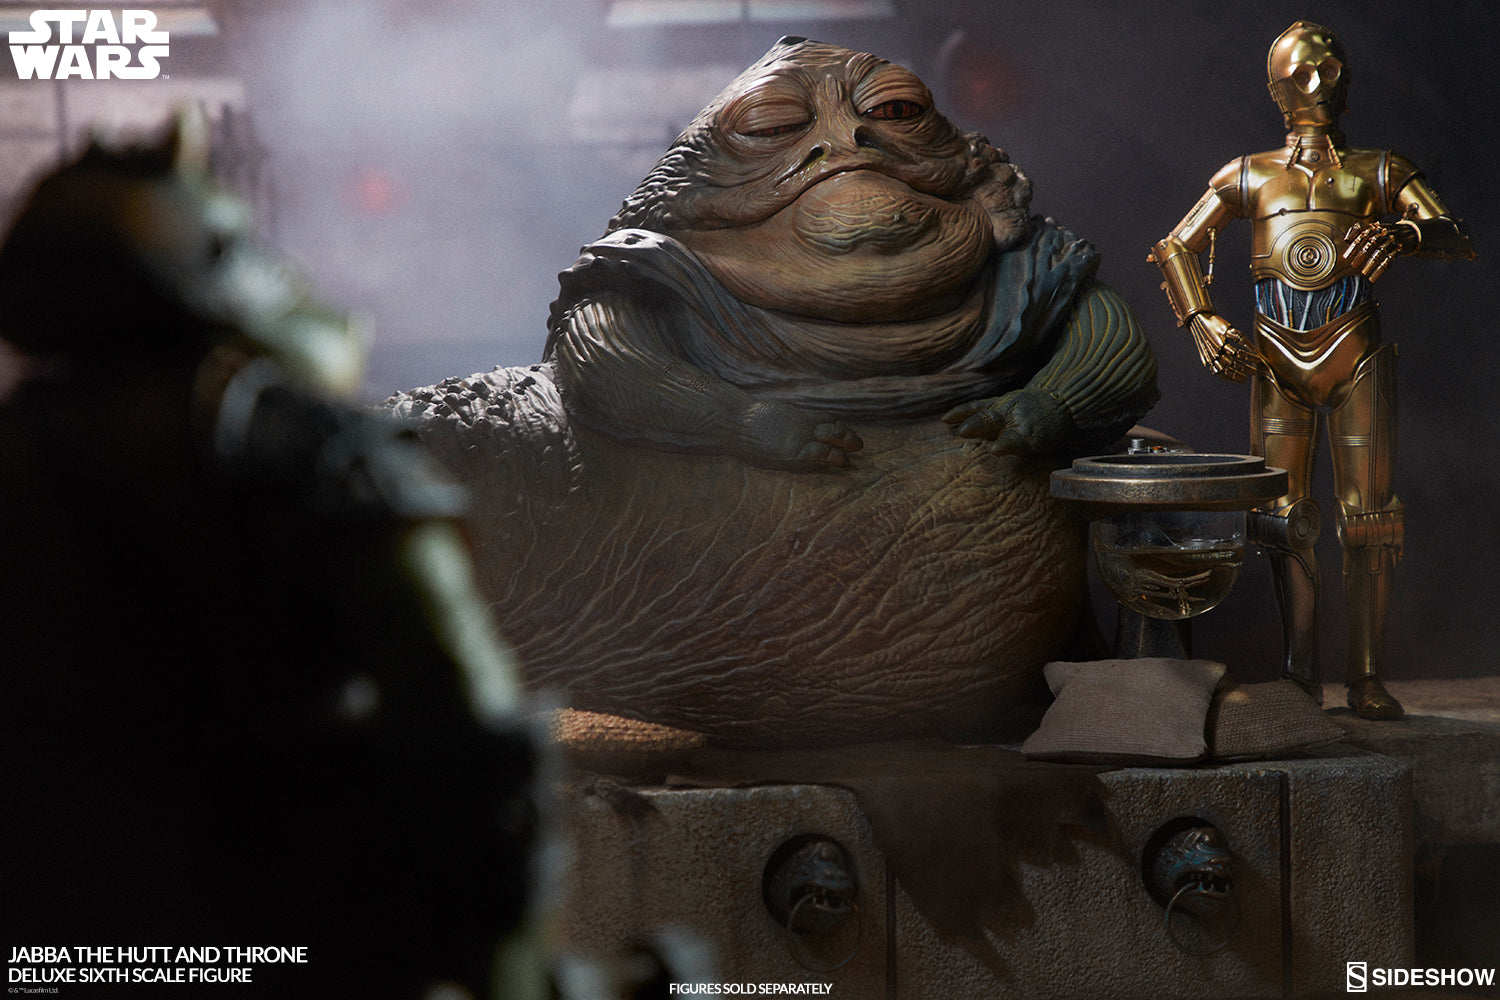 Sideshow Collectibles - Star Wars: Return of the Jedi - Jabba the Hutt and Throne Deluxe Sixth Scale Figure Set